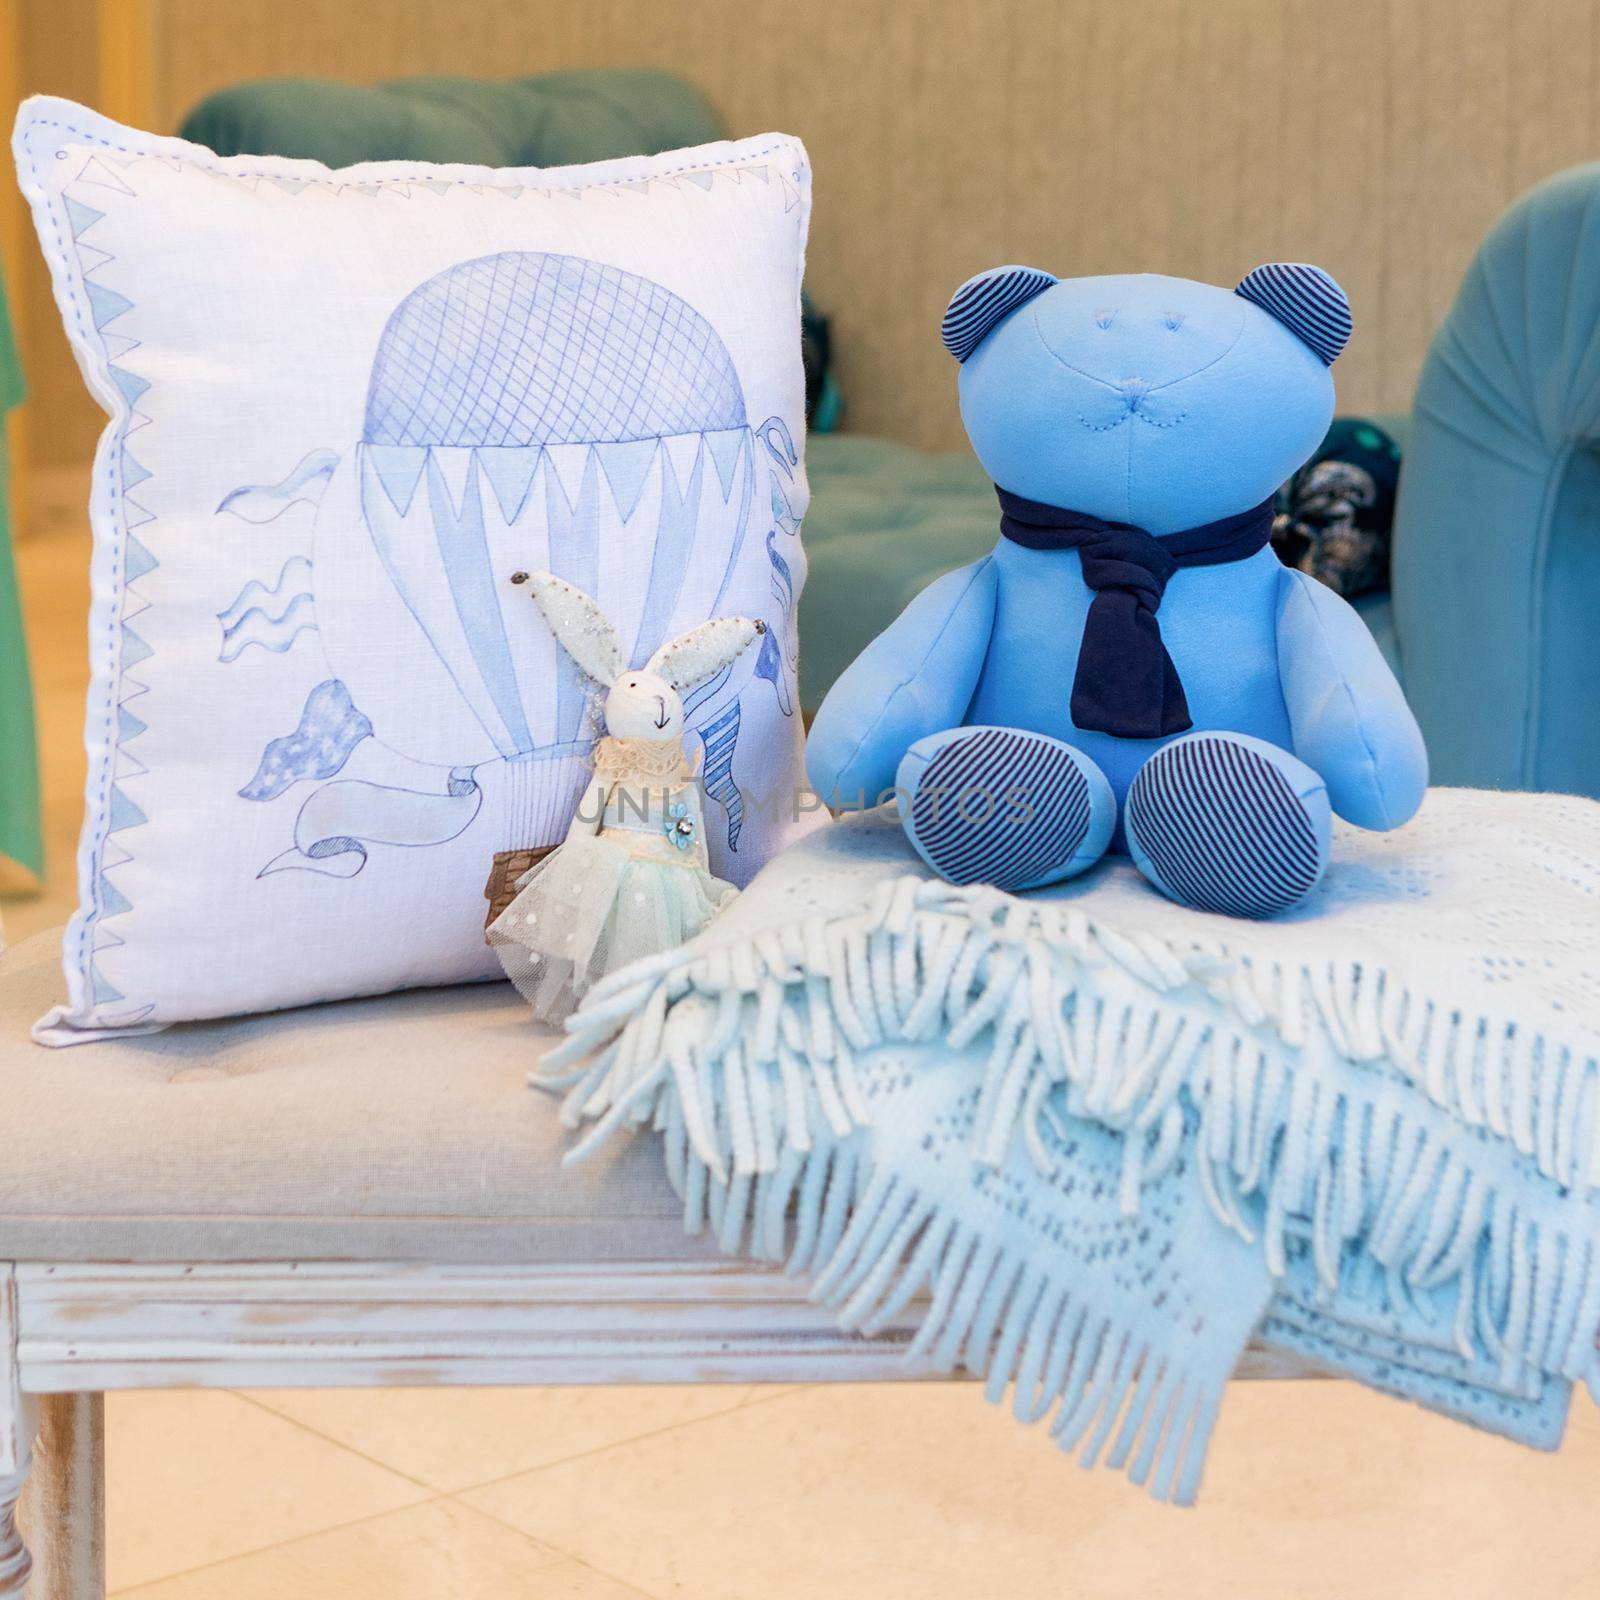 Set of colorful pillow with a bear toy on the showcase by ferhad